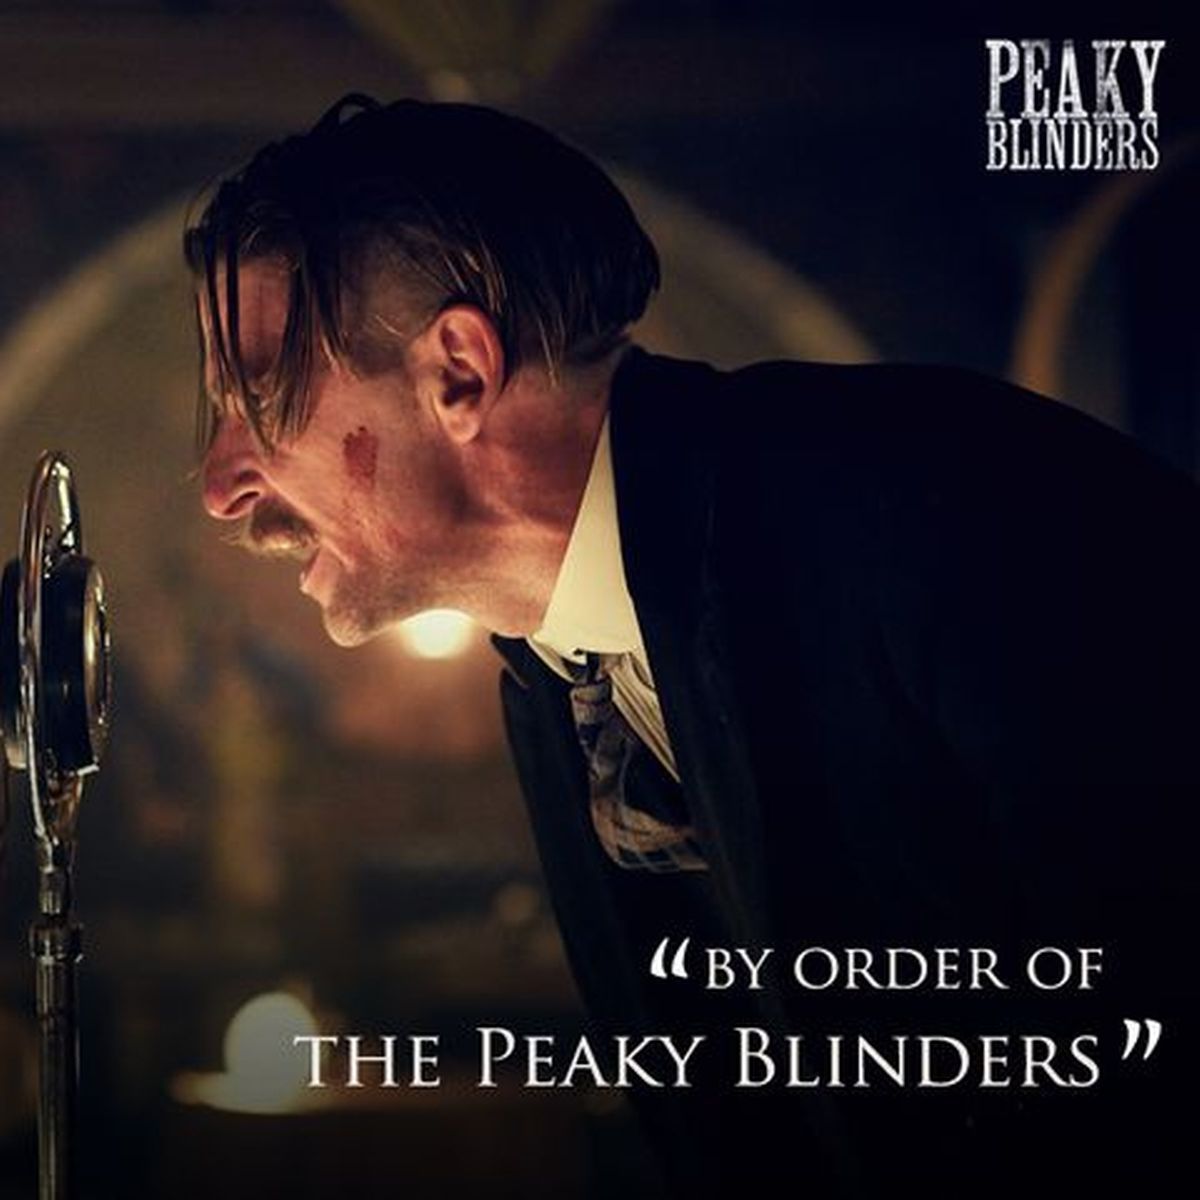 The very best quotes from Peaky Blinders